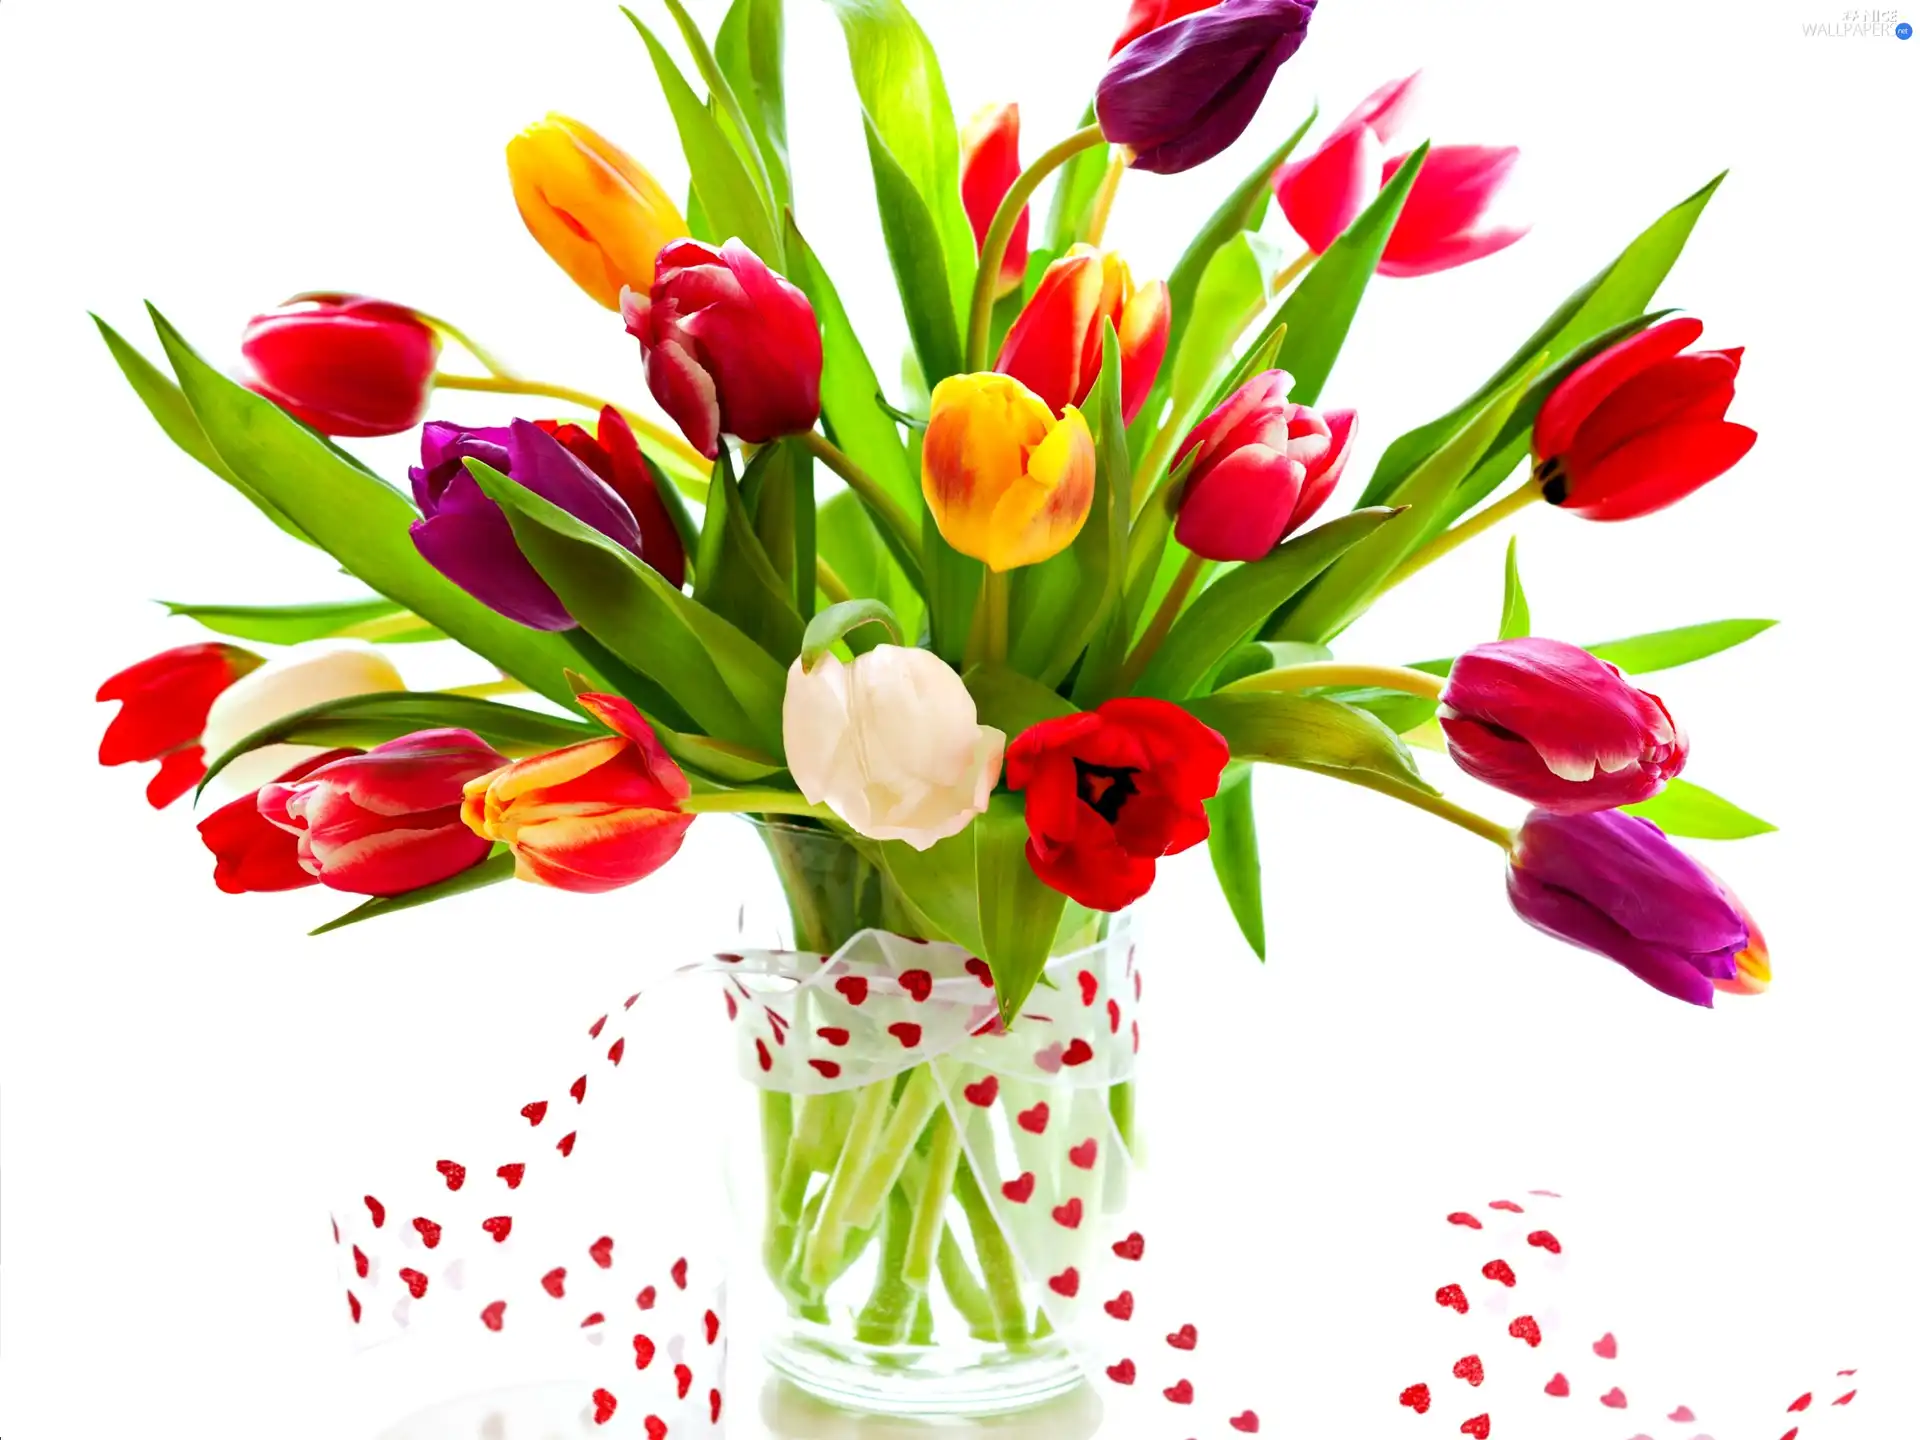 ribbon, hearts, Colorful, tulips, bouquet